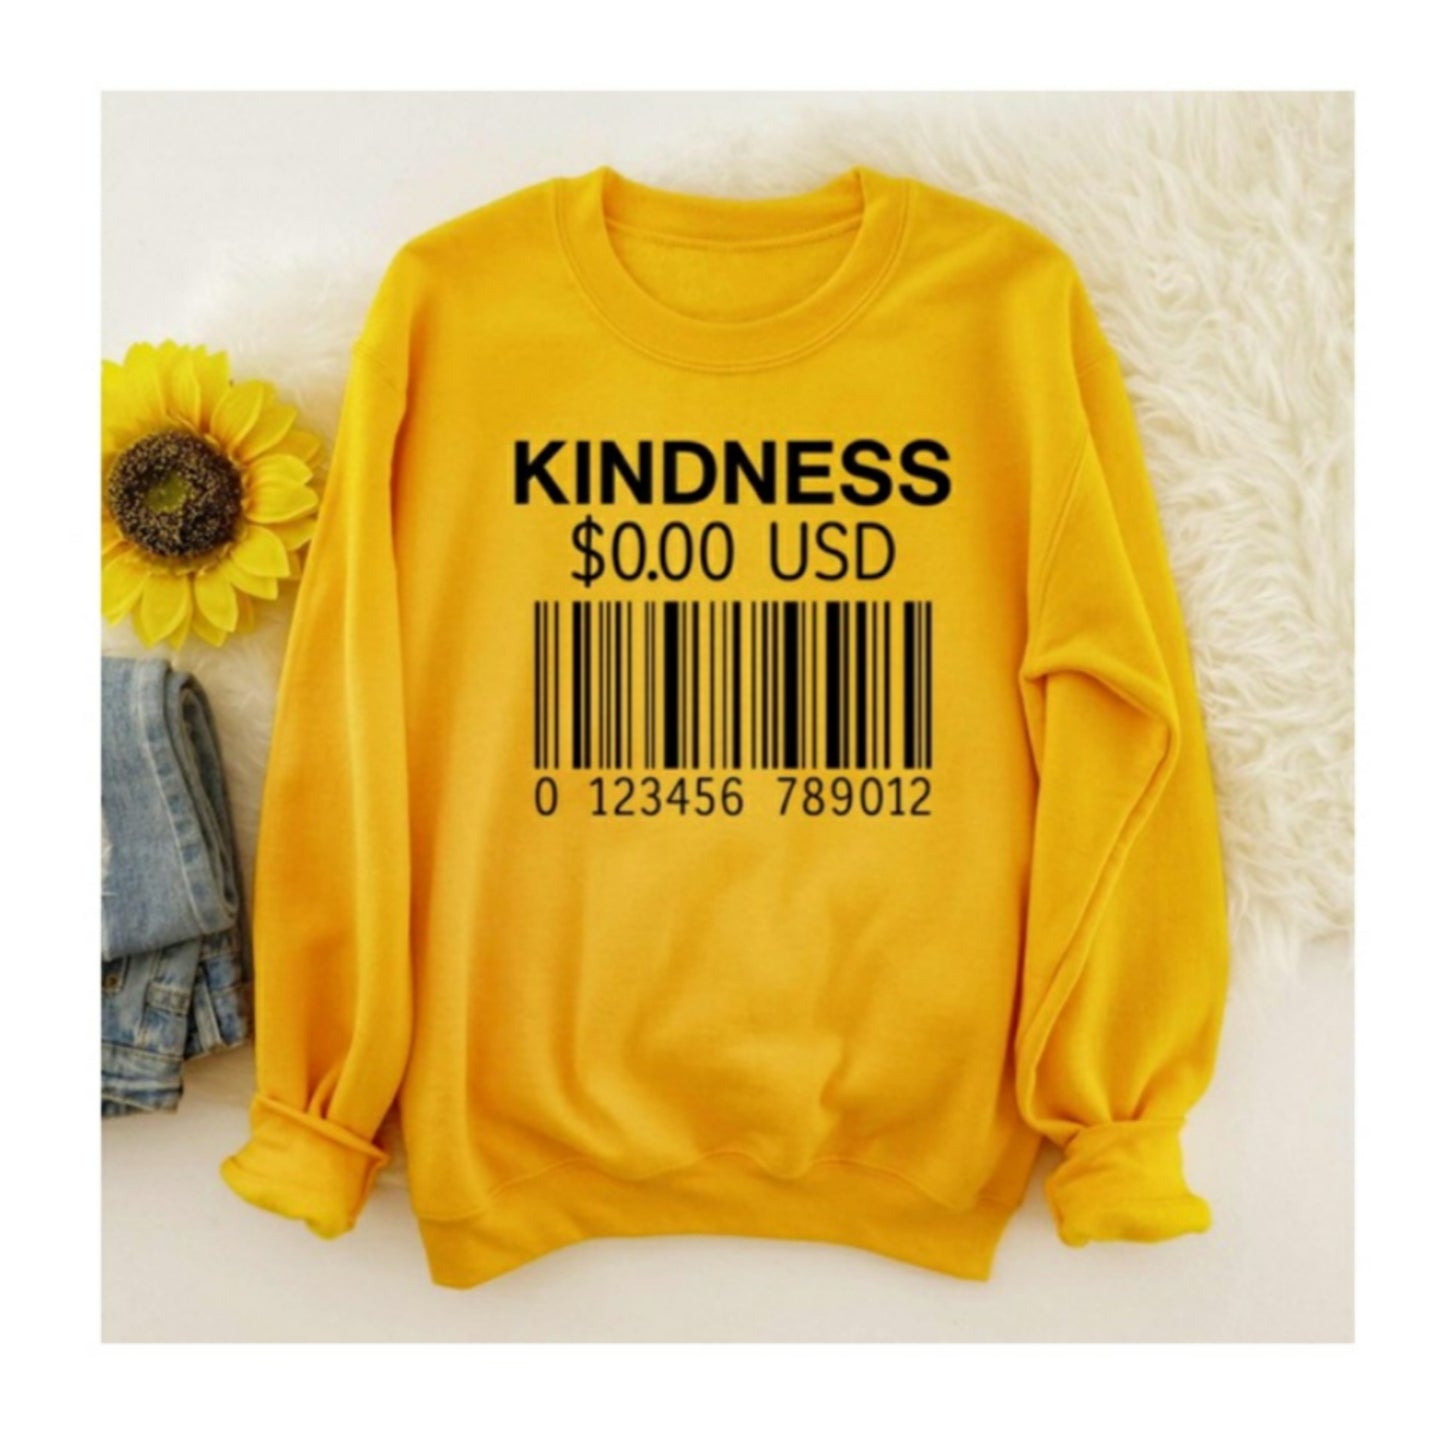 It Doesn't Cost A Thing Sweatshirt (Sizes Small - 3X) - (2 Options)